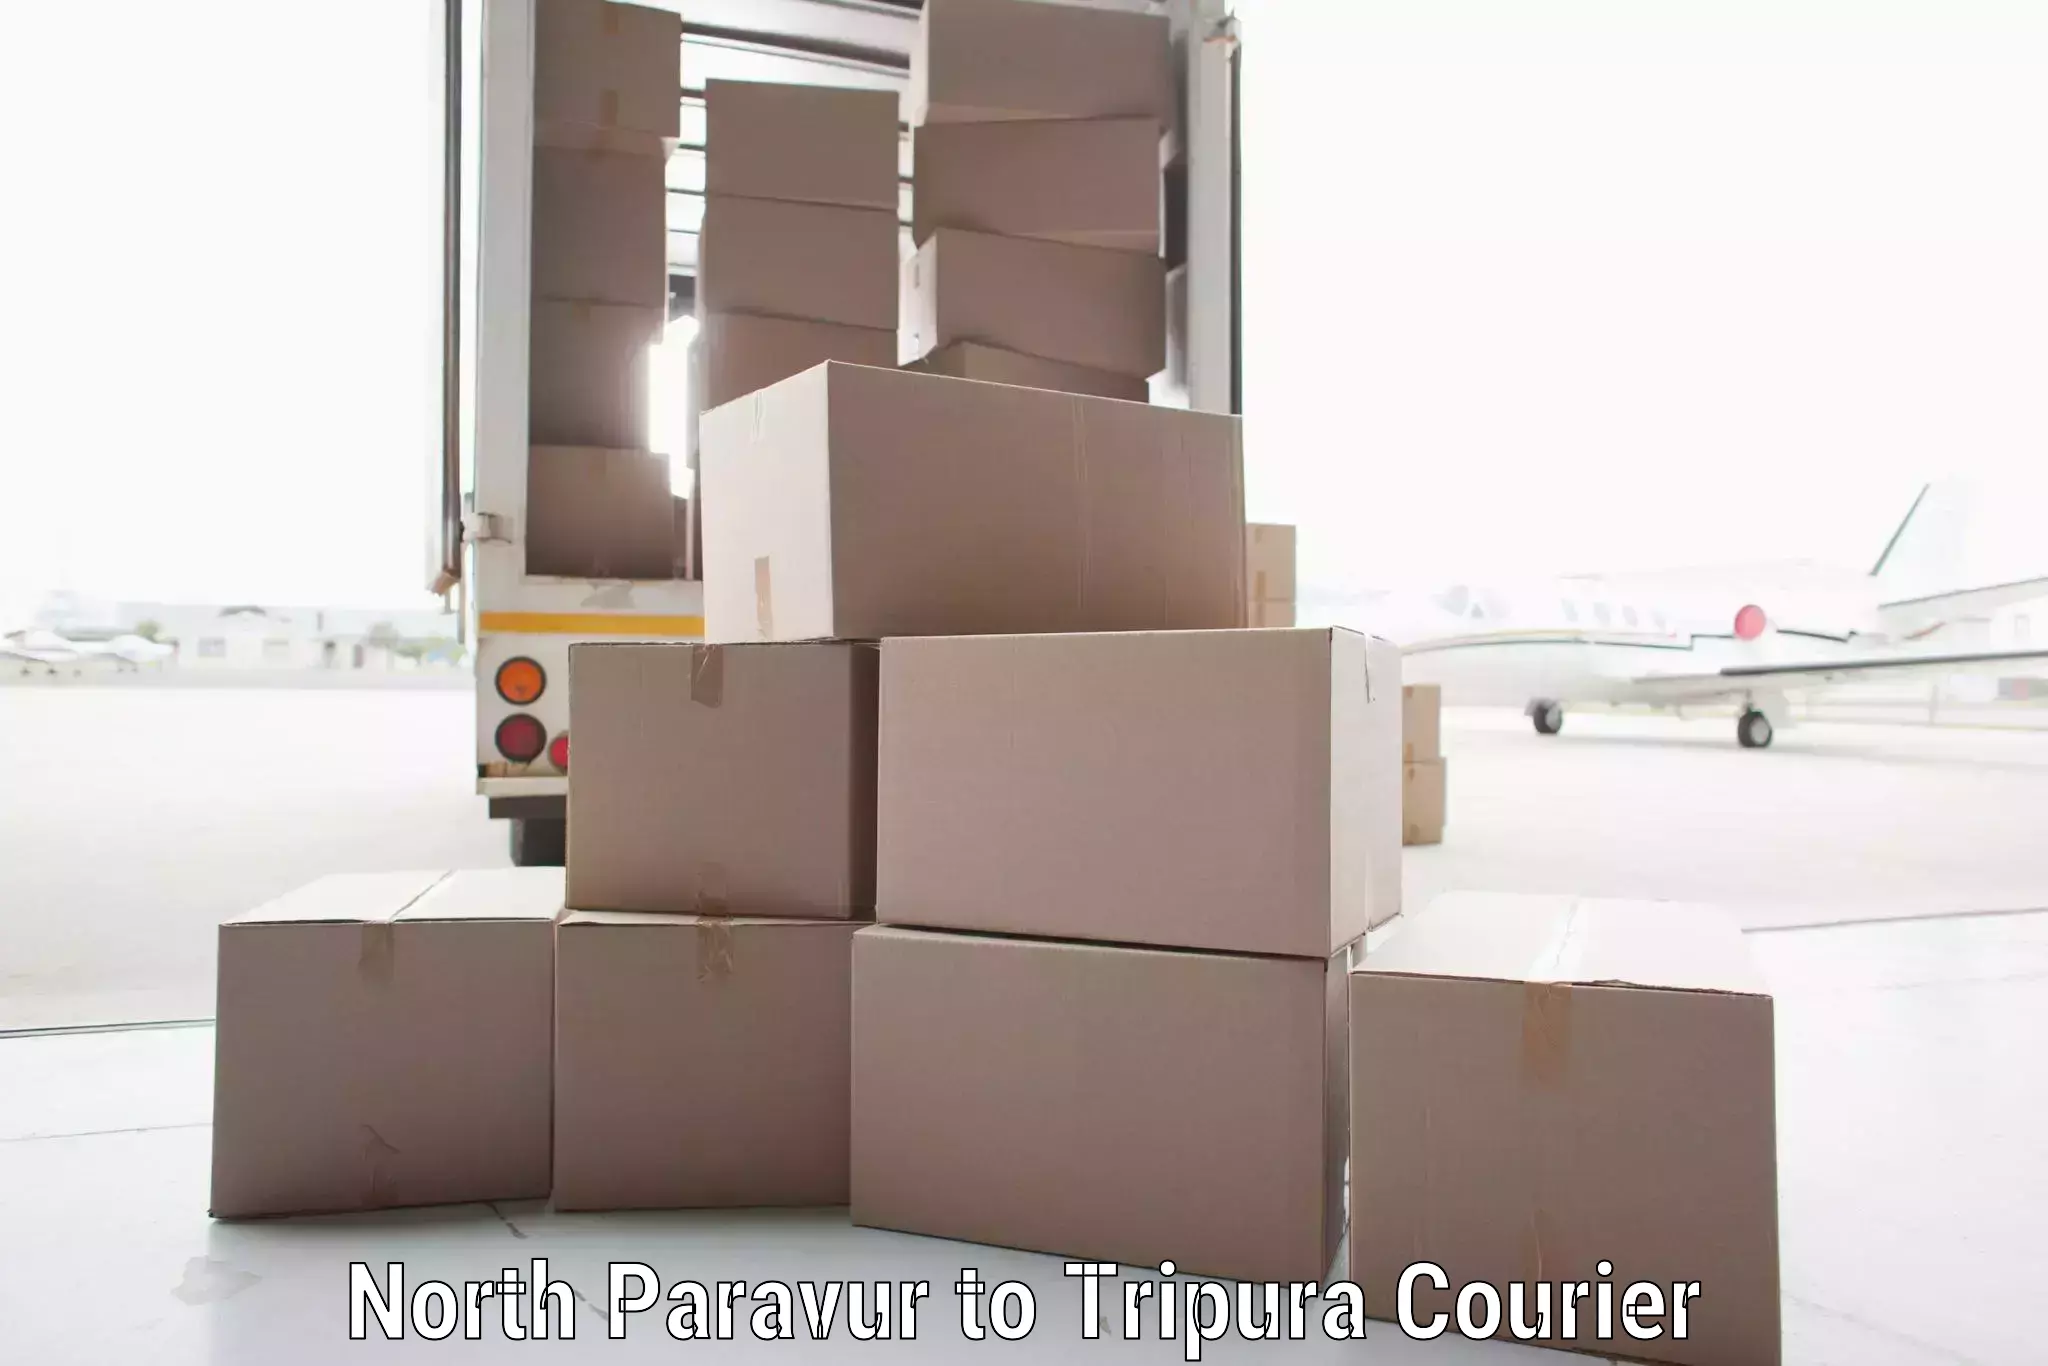 International courier networks North Paravur to Udaipur Tripura